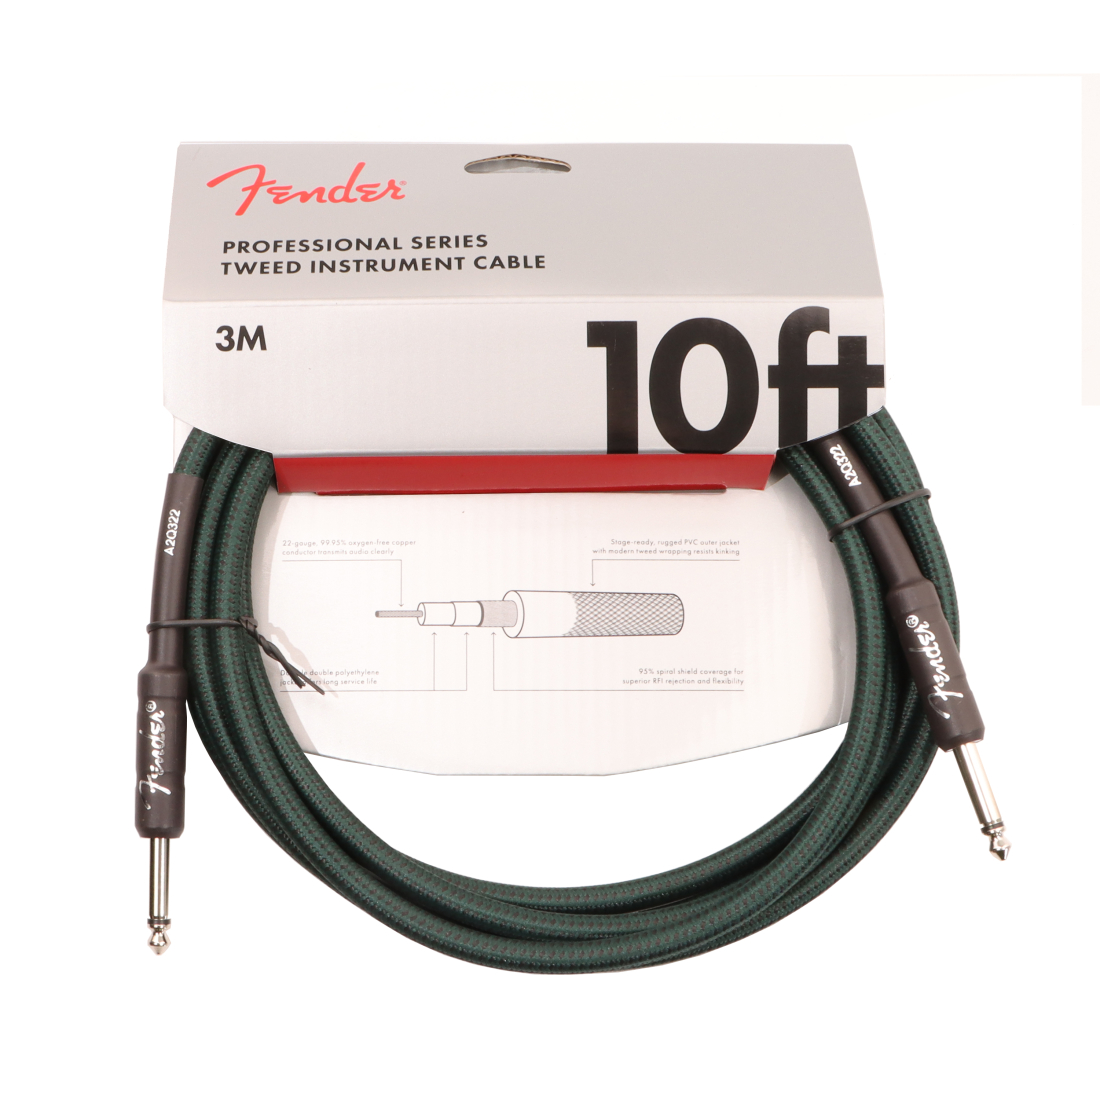 Professional Series Instrument Cable, 10\', Sherwood Green Tweed